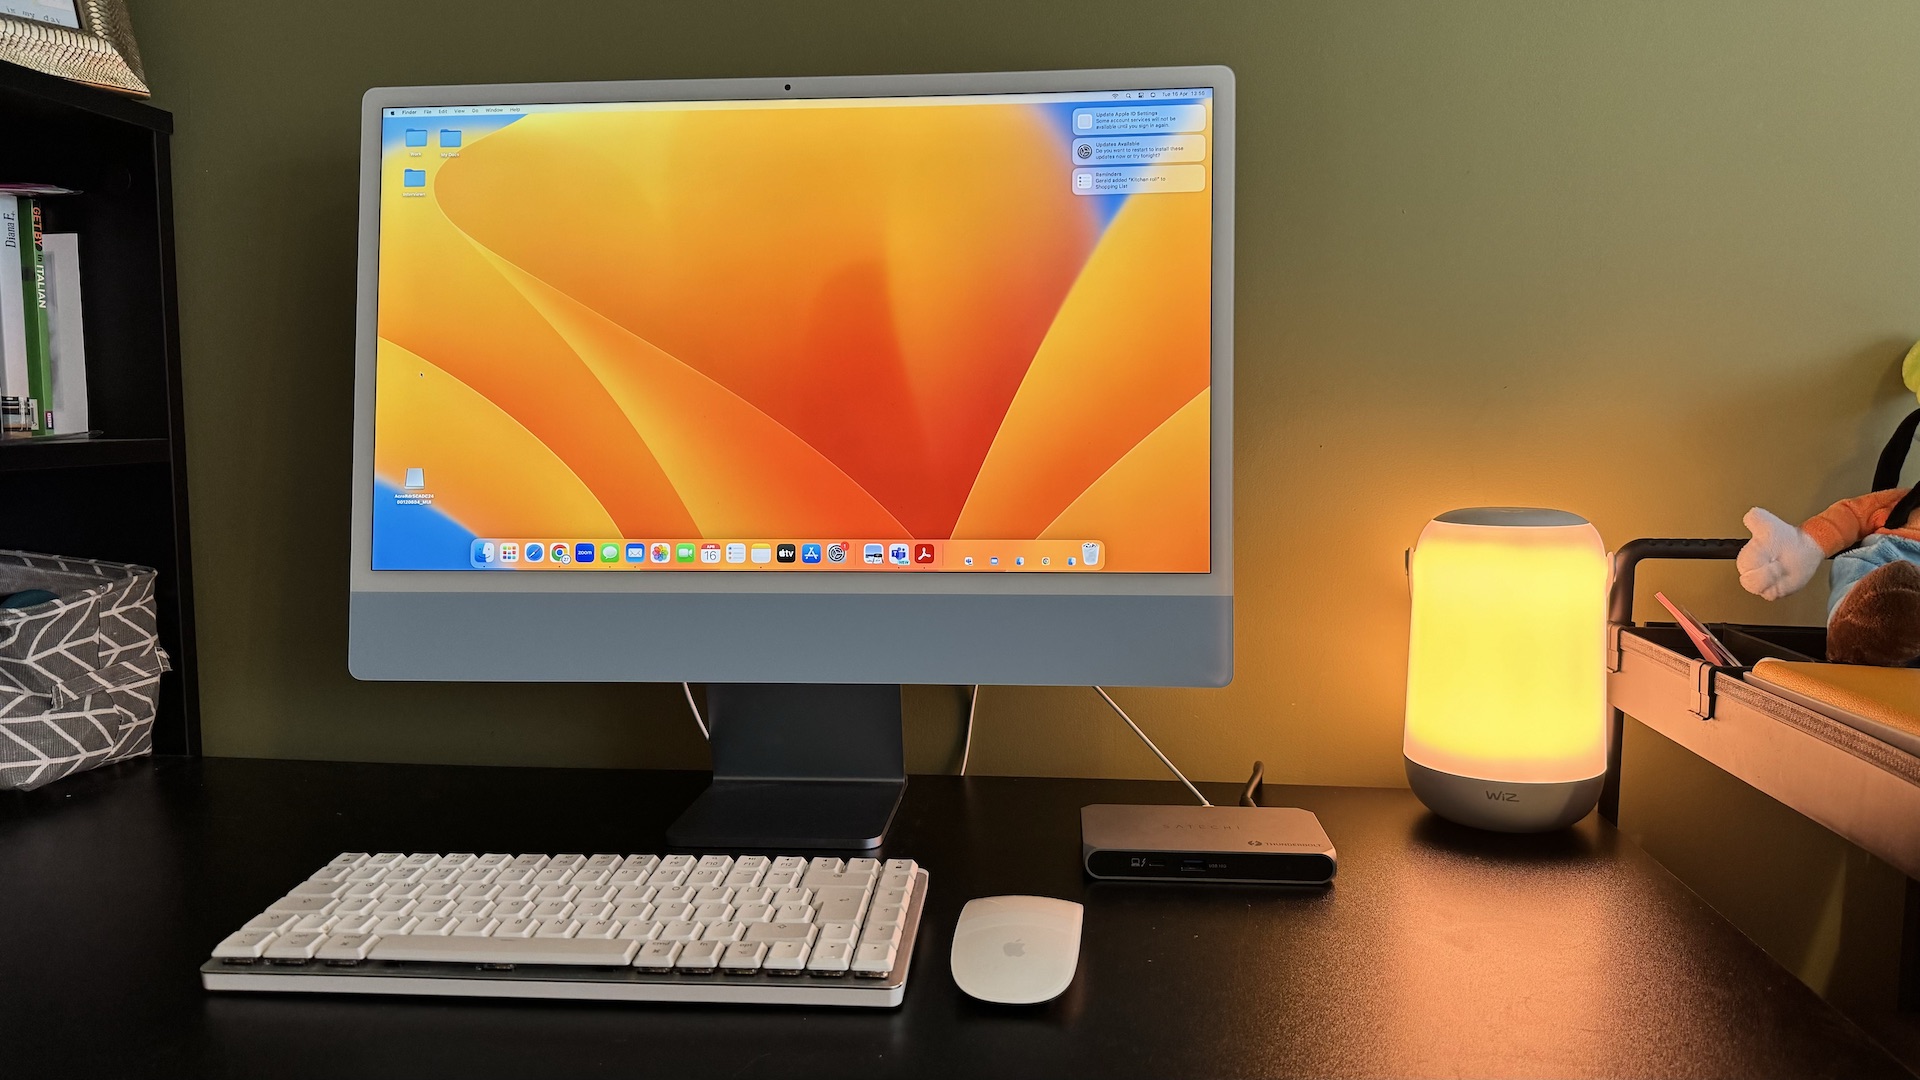 Satechi Thunderbolt 4 Slim Pro Hub on a black desk with Mac and accessories